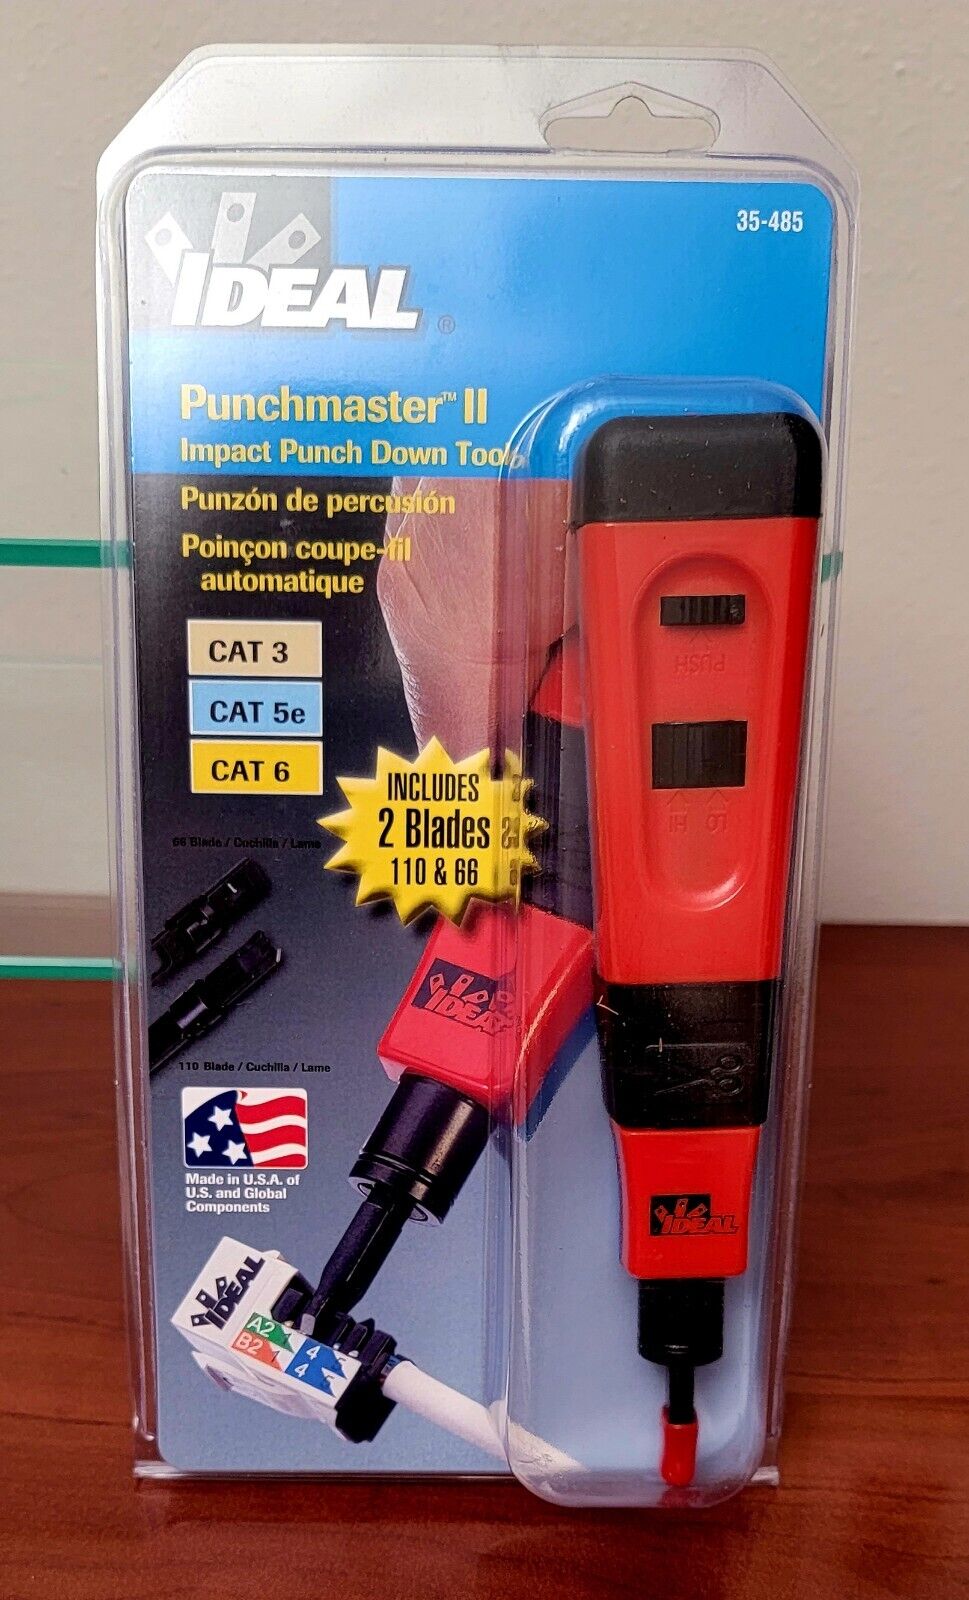 Ideal Punchmaster II Impact Punch Down Tool (35-485) *Proceeds For Local Charity